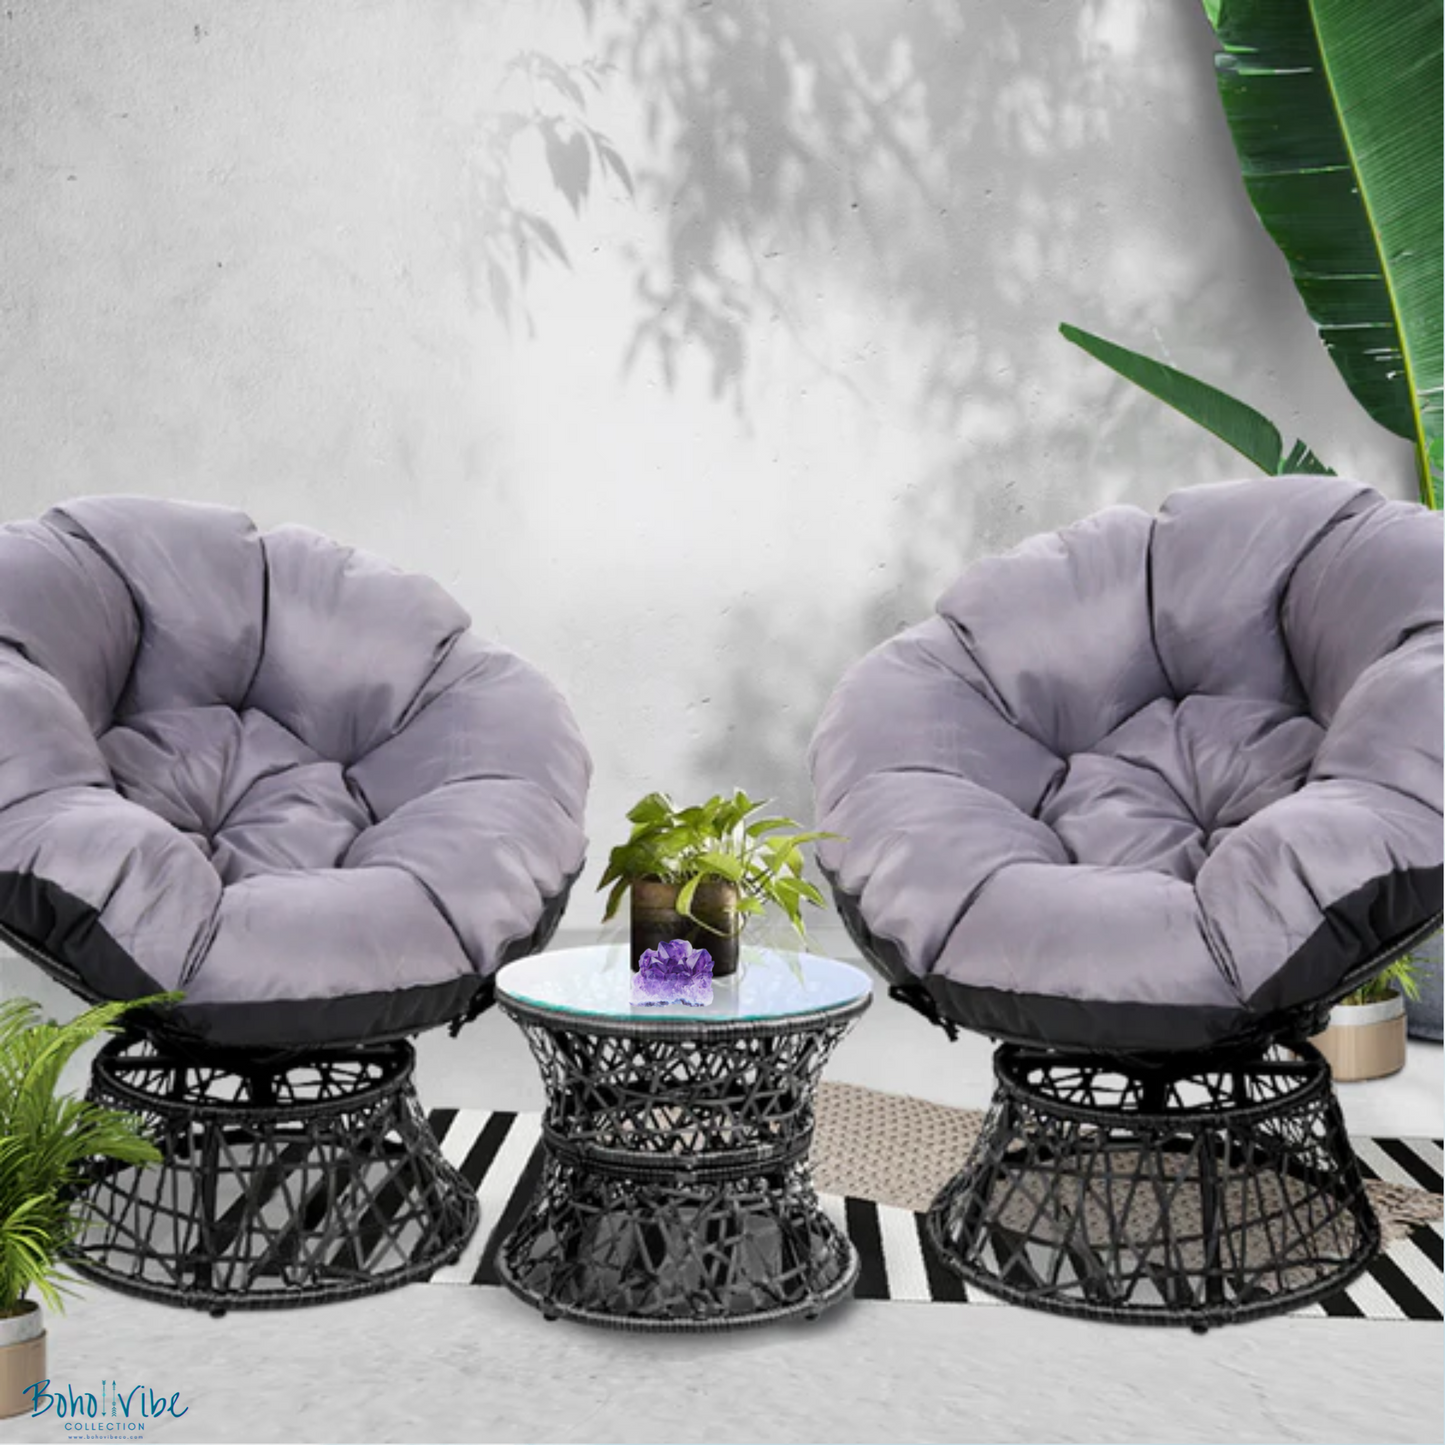 Boho ↡↟ Vibe Collection ↠ Bohemian Papasan Chairs and Black Rattan Furniture Table and Chairs Set